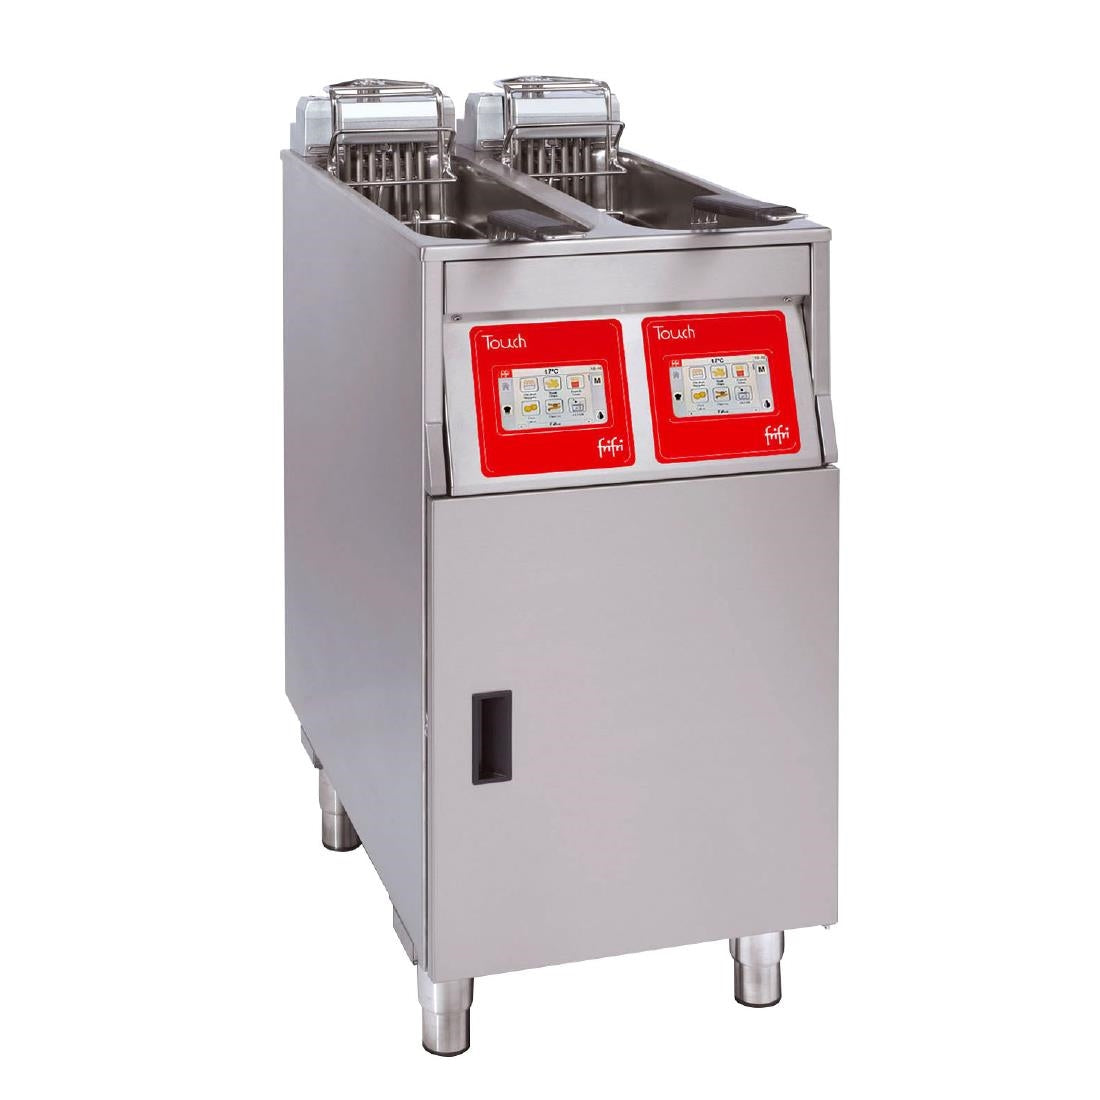 HS012-3PH FriFri Touch 422 Electric Free-Standing Twin Tank Fryer 2 Baskets 2x 7.5kW - Three Phase